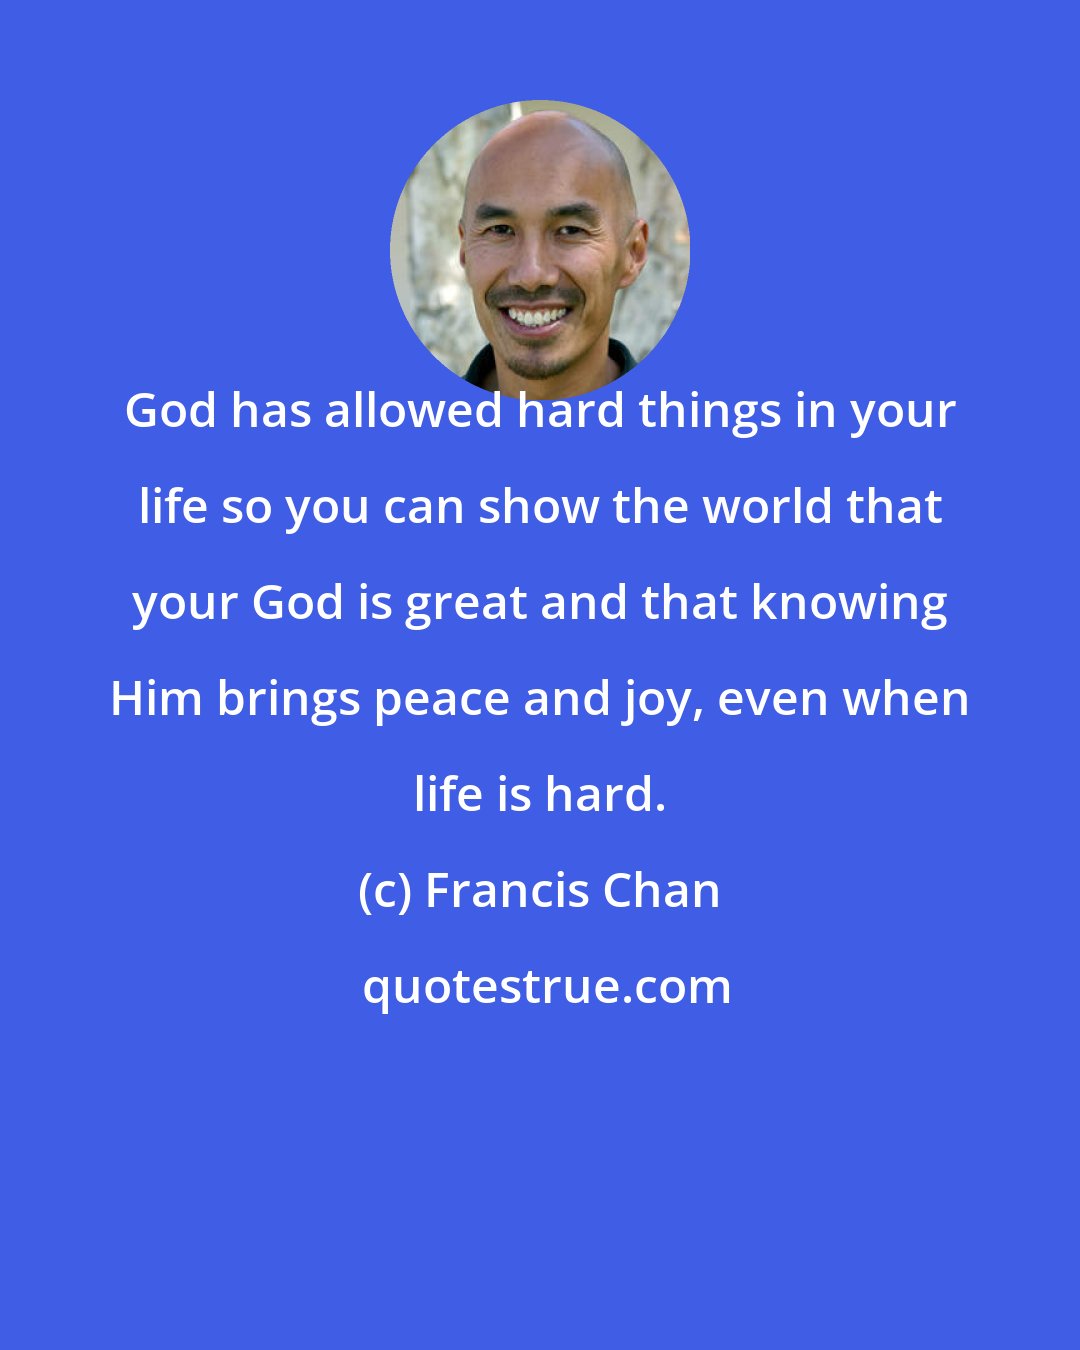 Francis Chan: God has allowed hard things in your life so you can show the world that your God is great and that knowing Him brings peace and joy, even when life is hard.